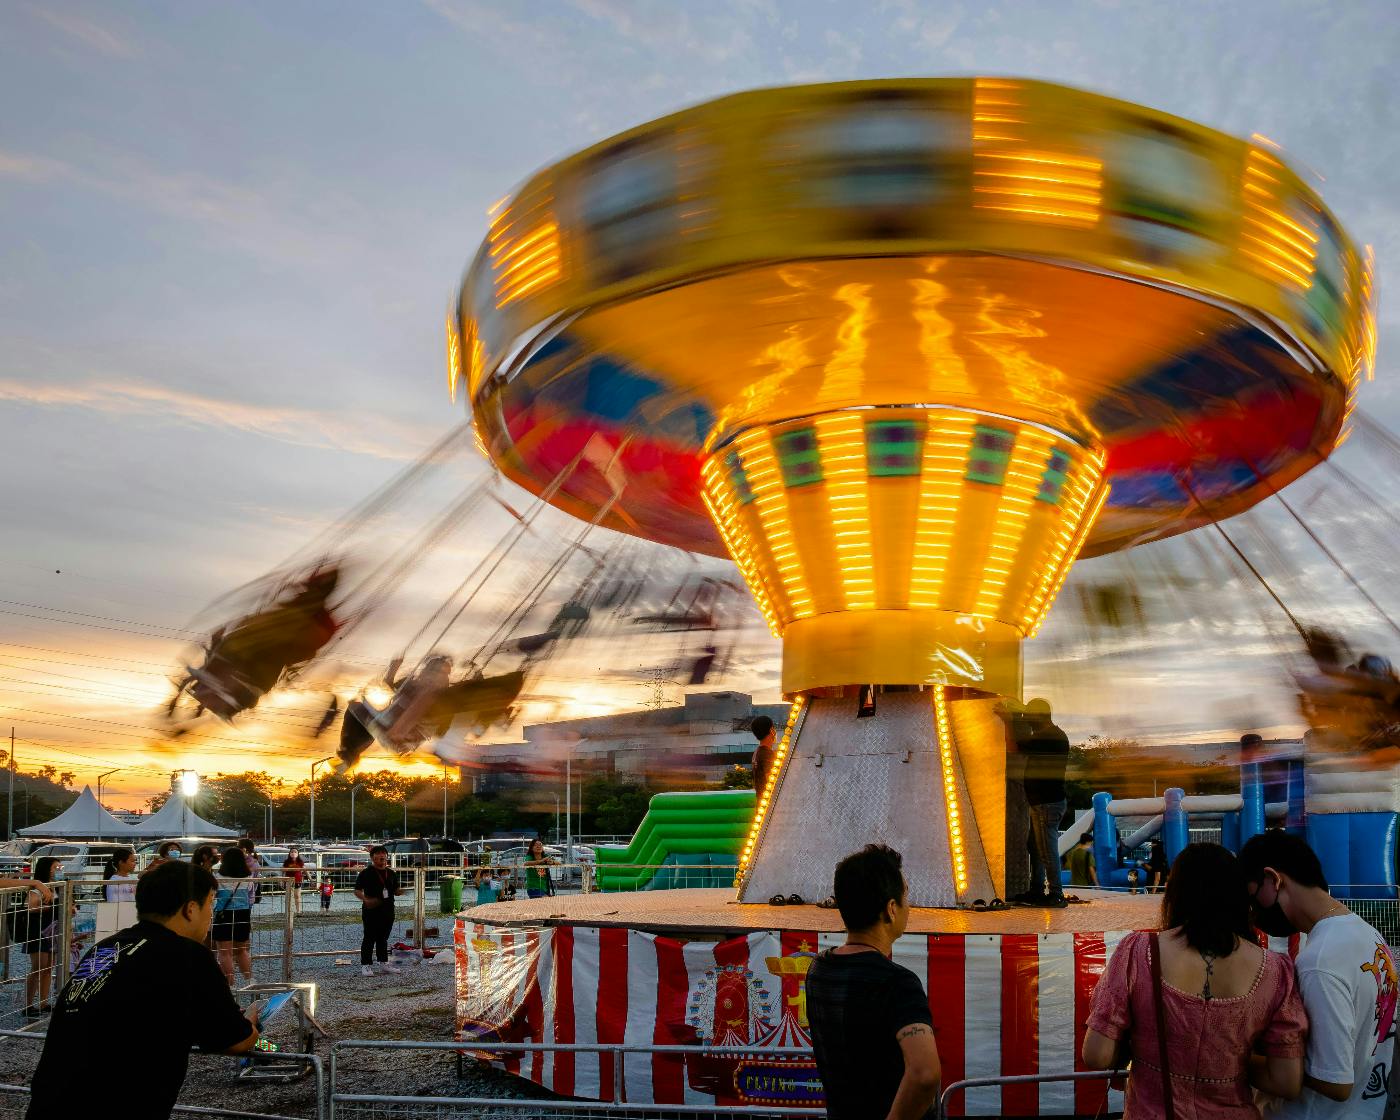 A lighted spinning ride at a fair